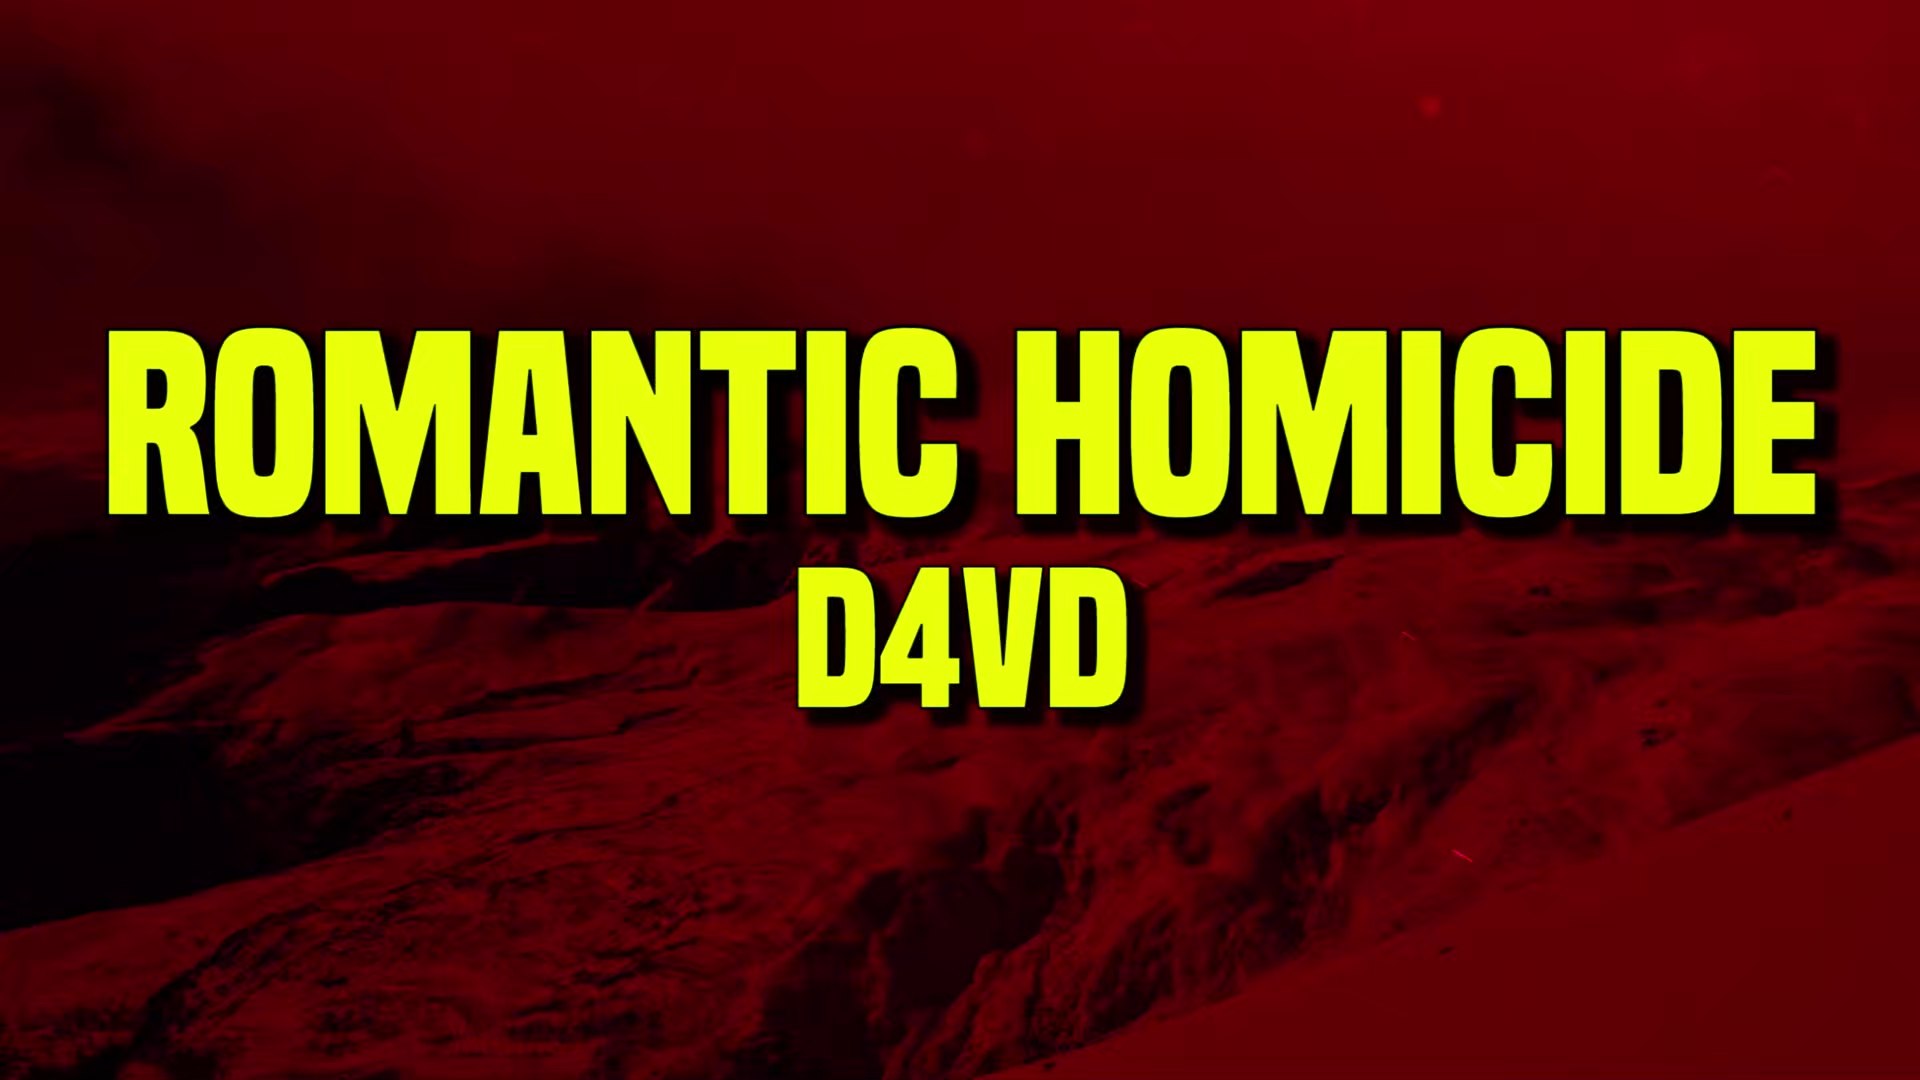 The latest Romantic Homicide videos on Dailymotion